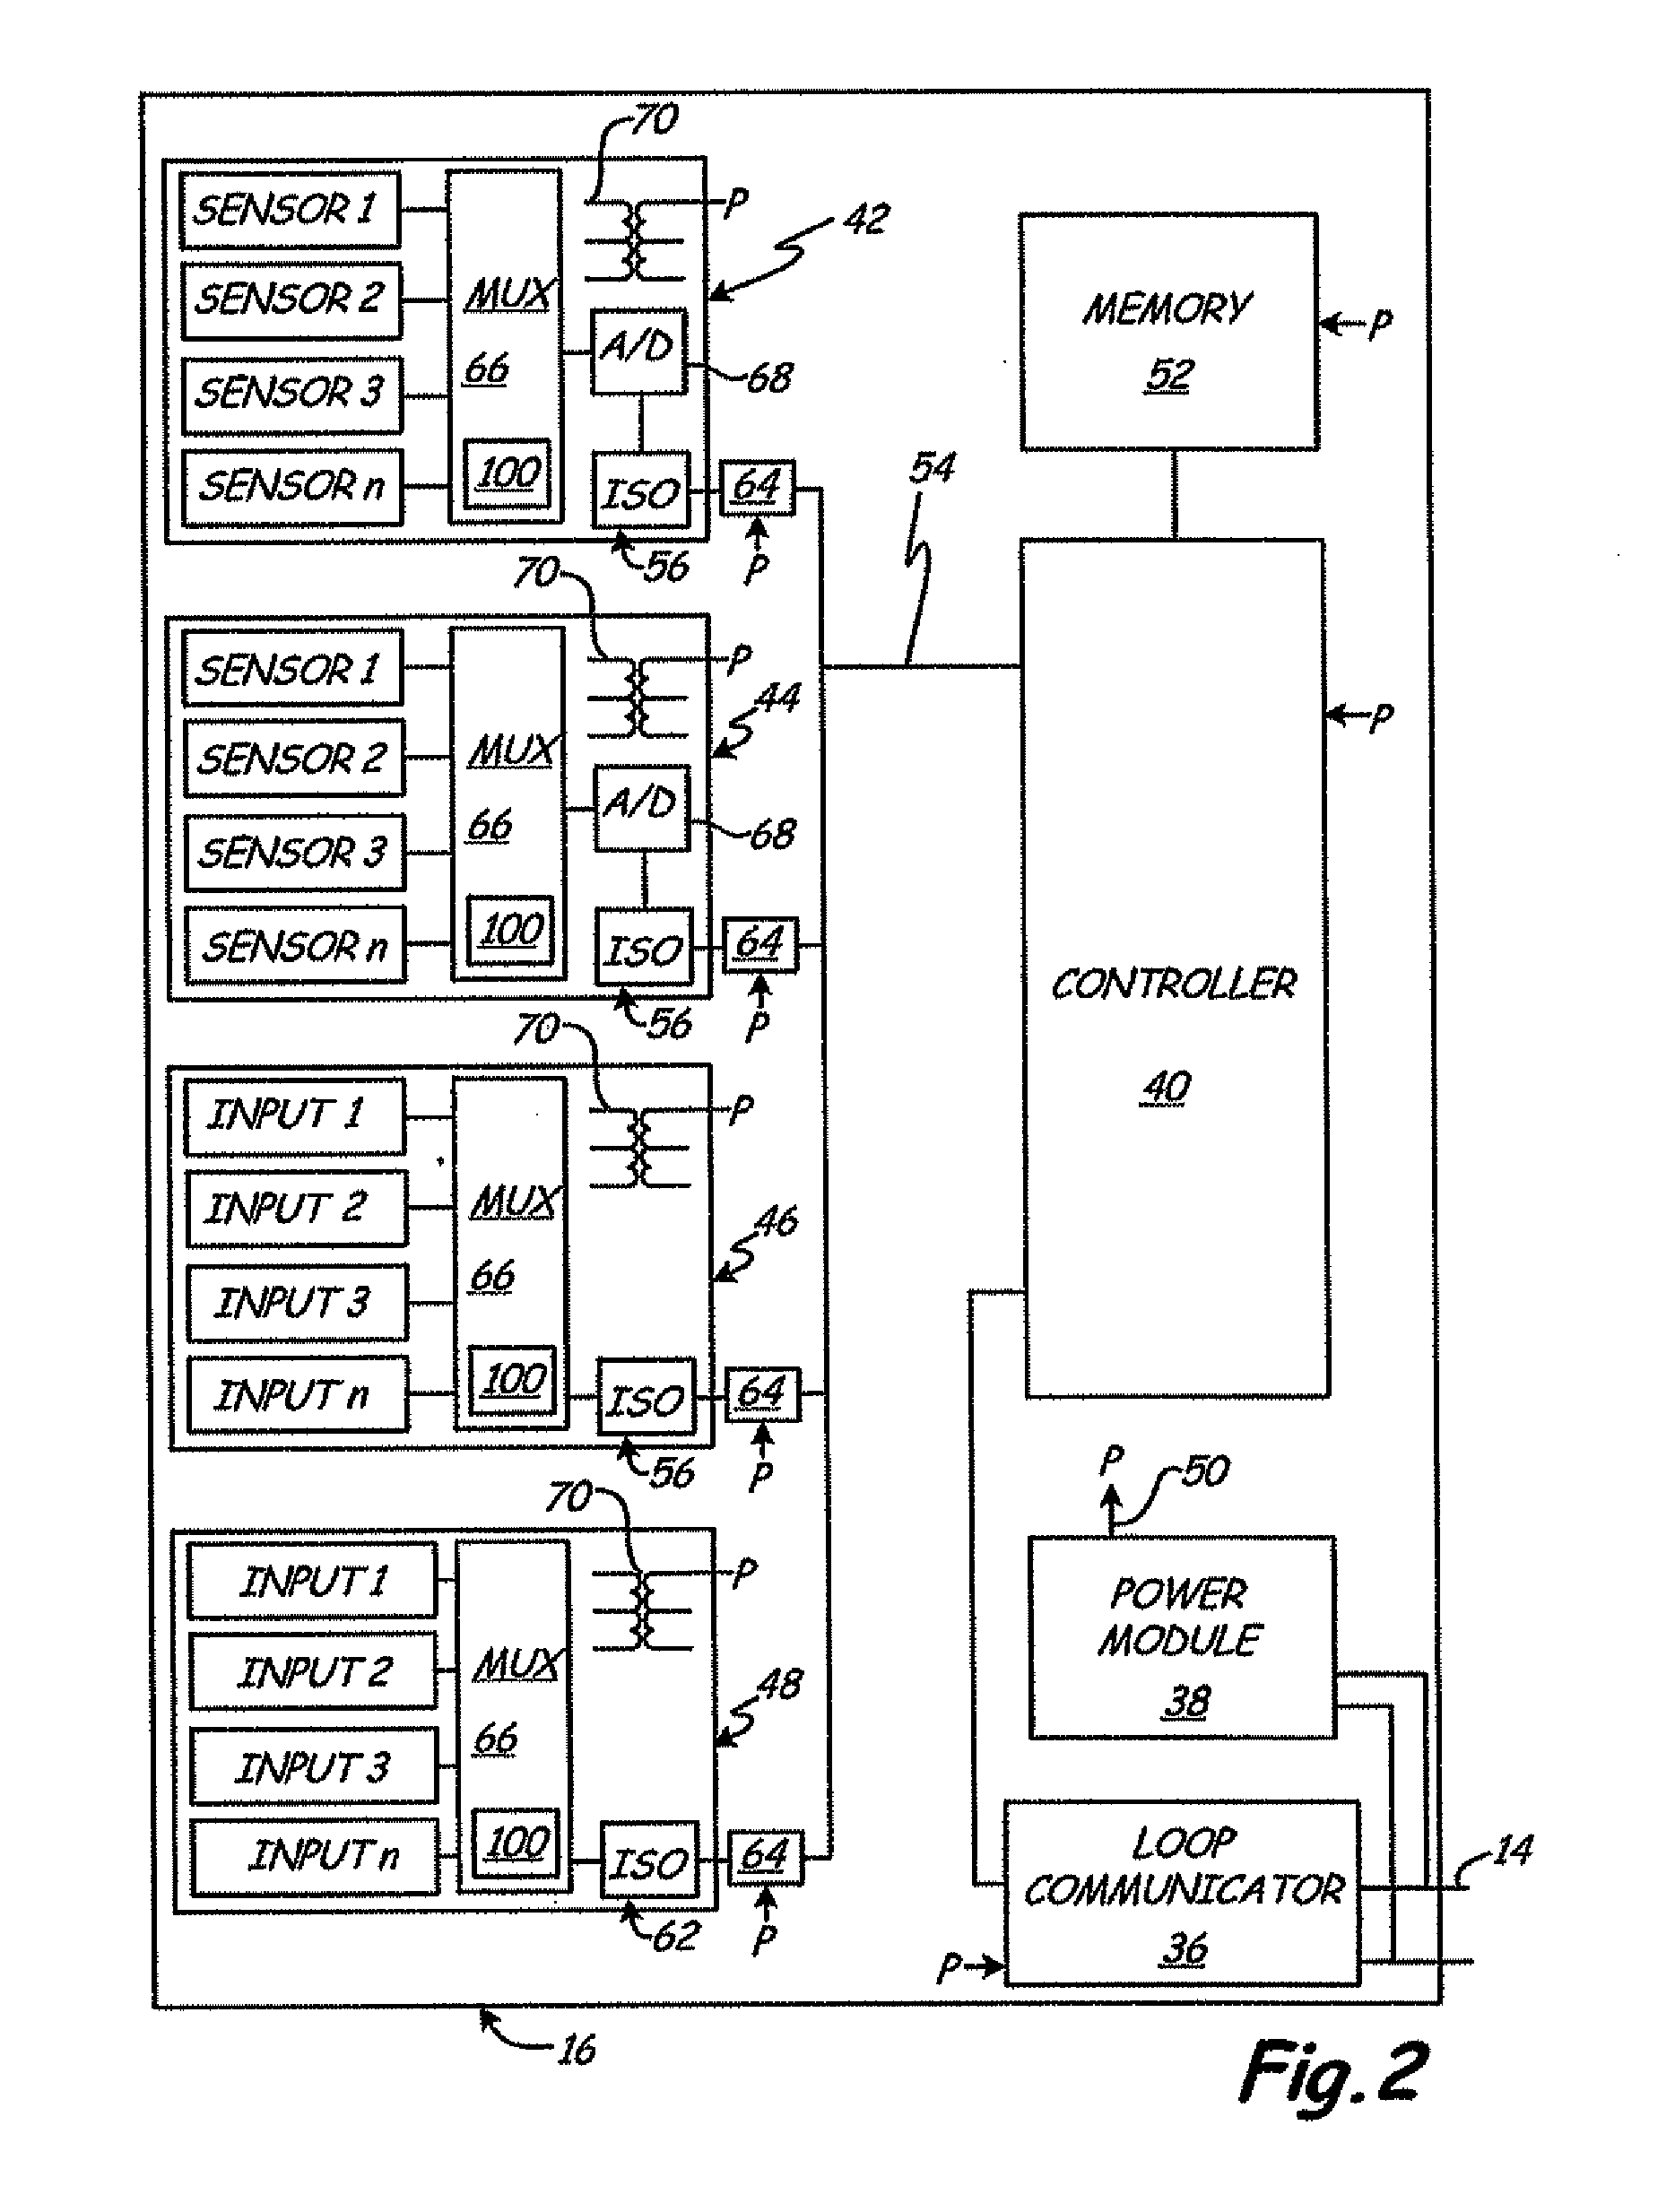 Industrial process control transmitter with multiple sensors